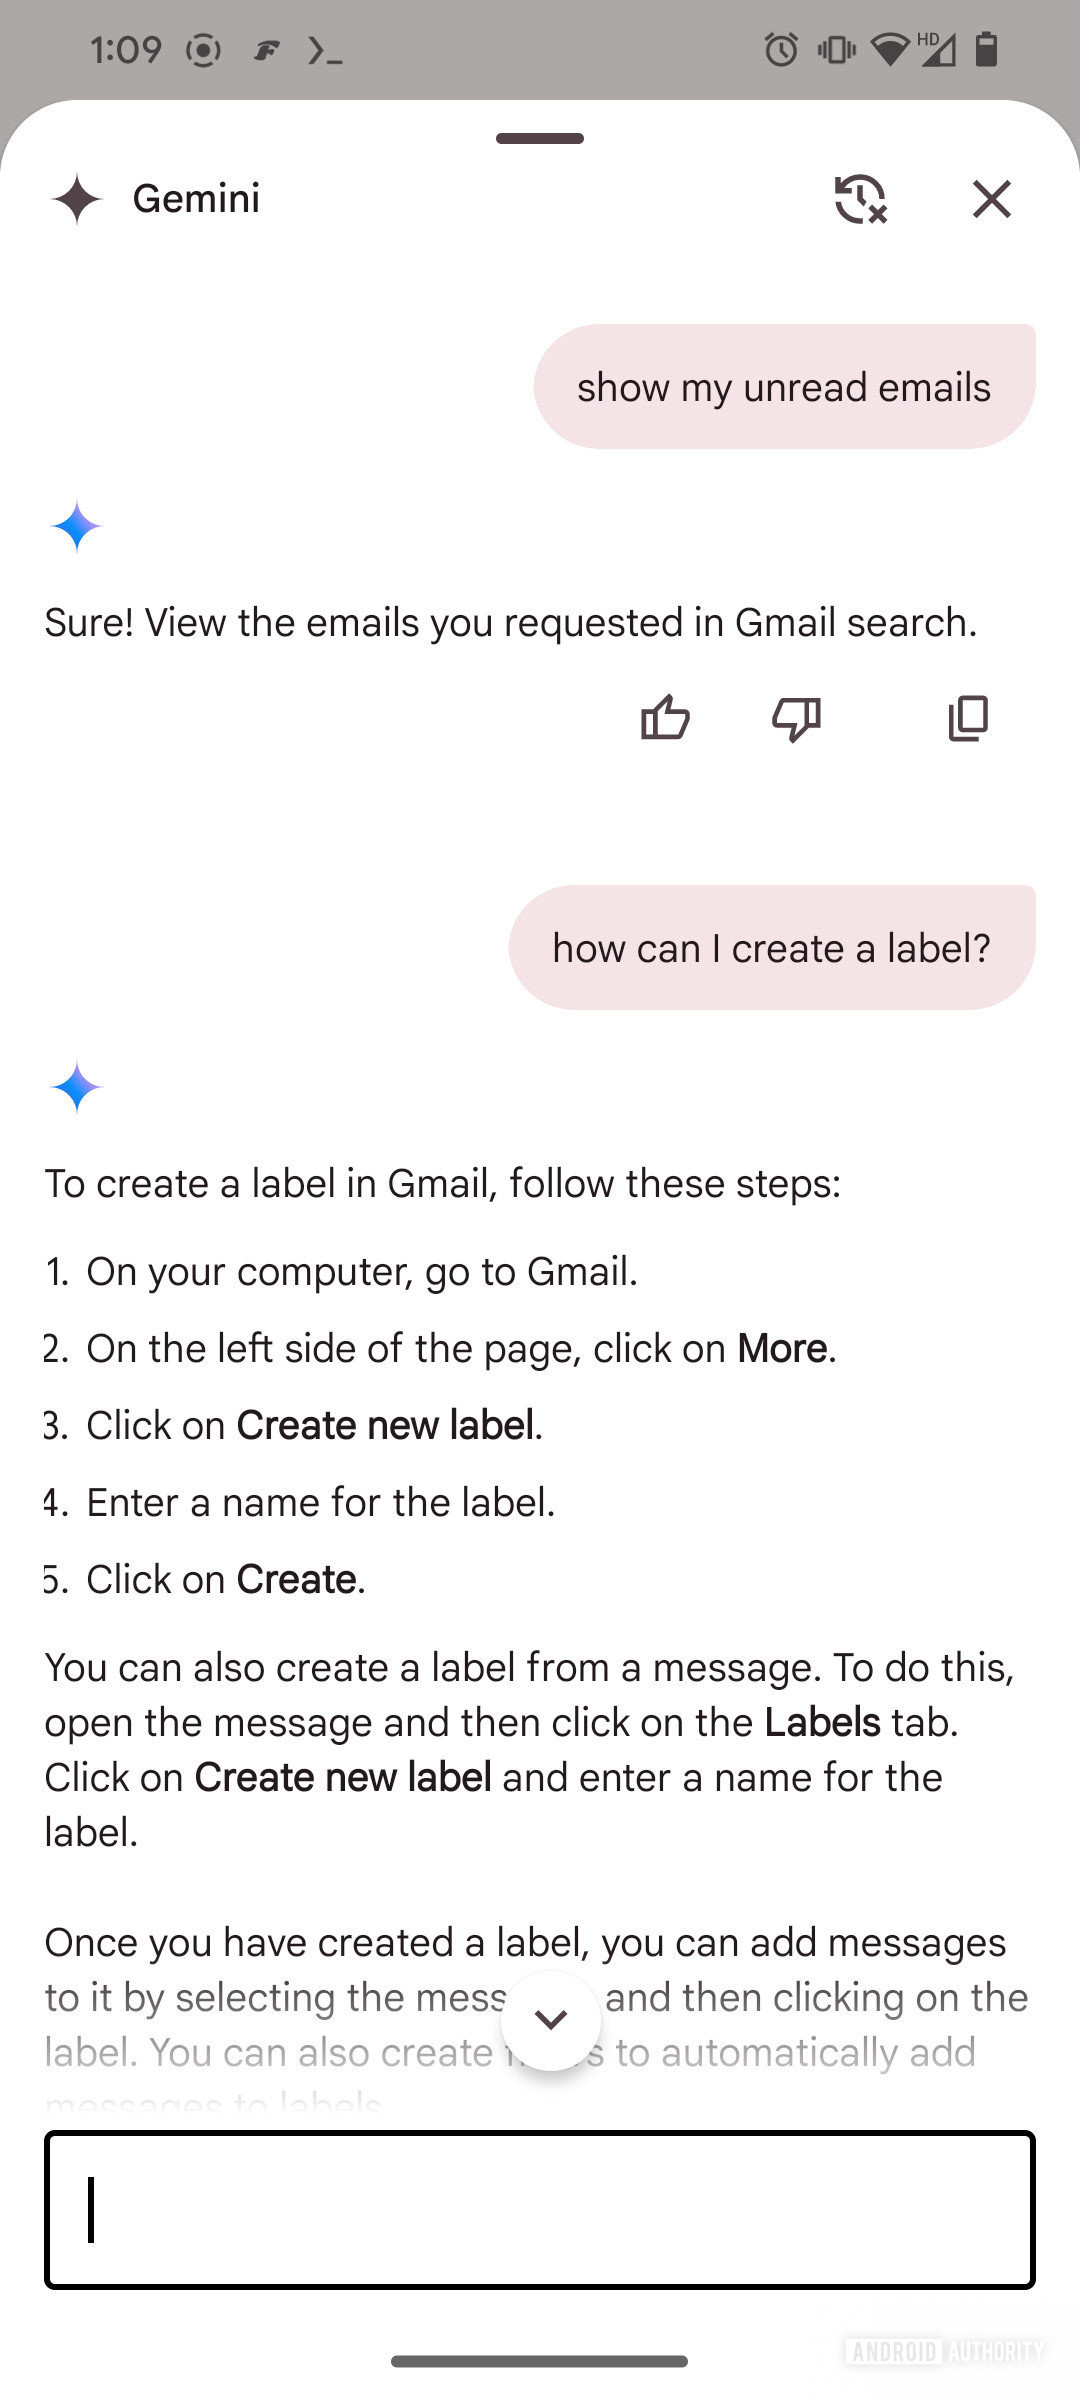 The chat window after summoning Gemini in the Gmail app for Android.